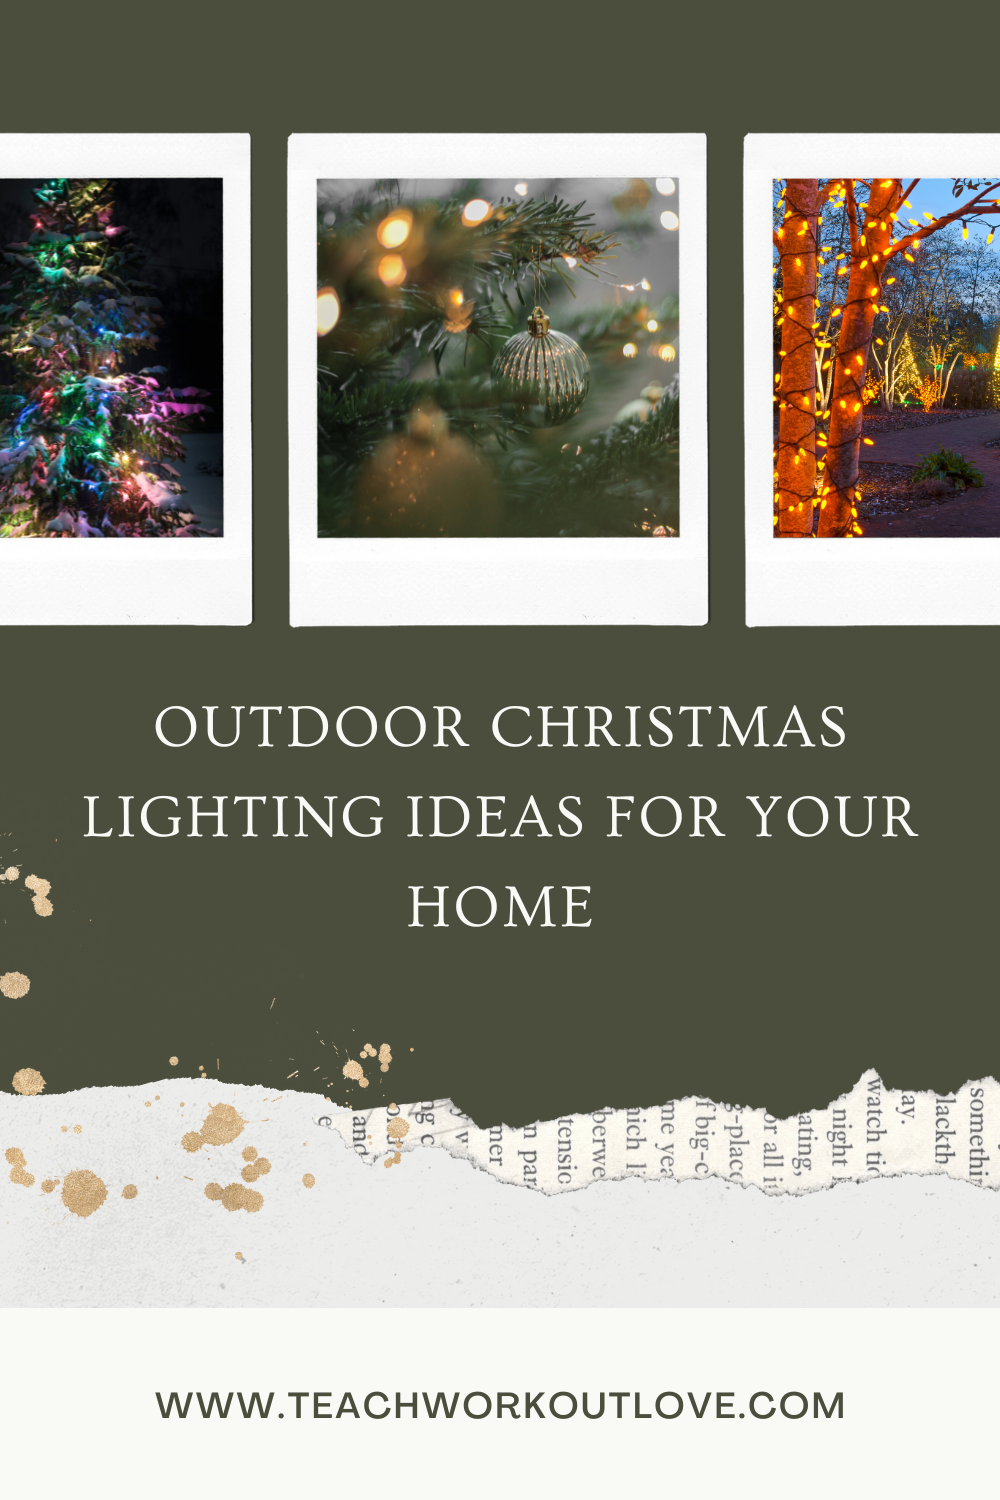 Check out these outdoor Christmas lighting ideas if you're looking for creative and festive ways to light up your home this holiday season.